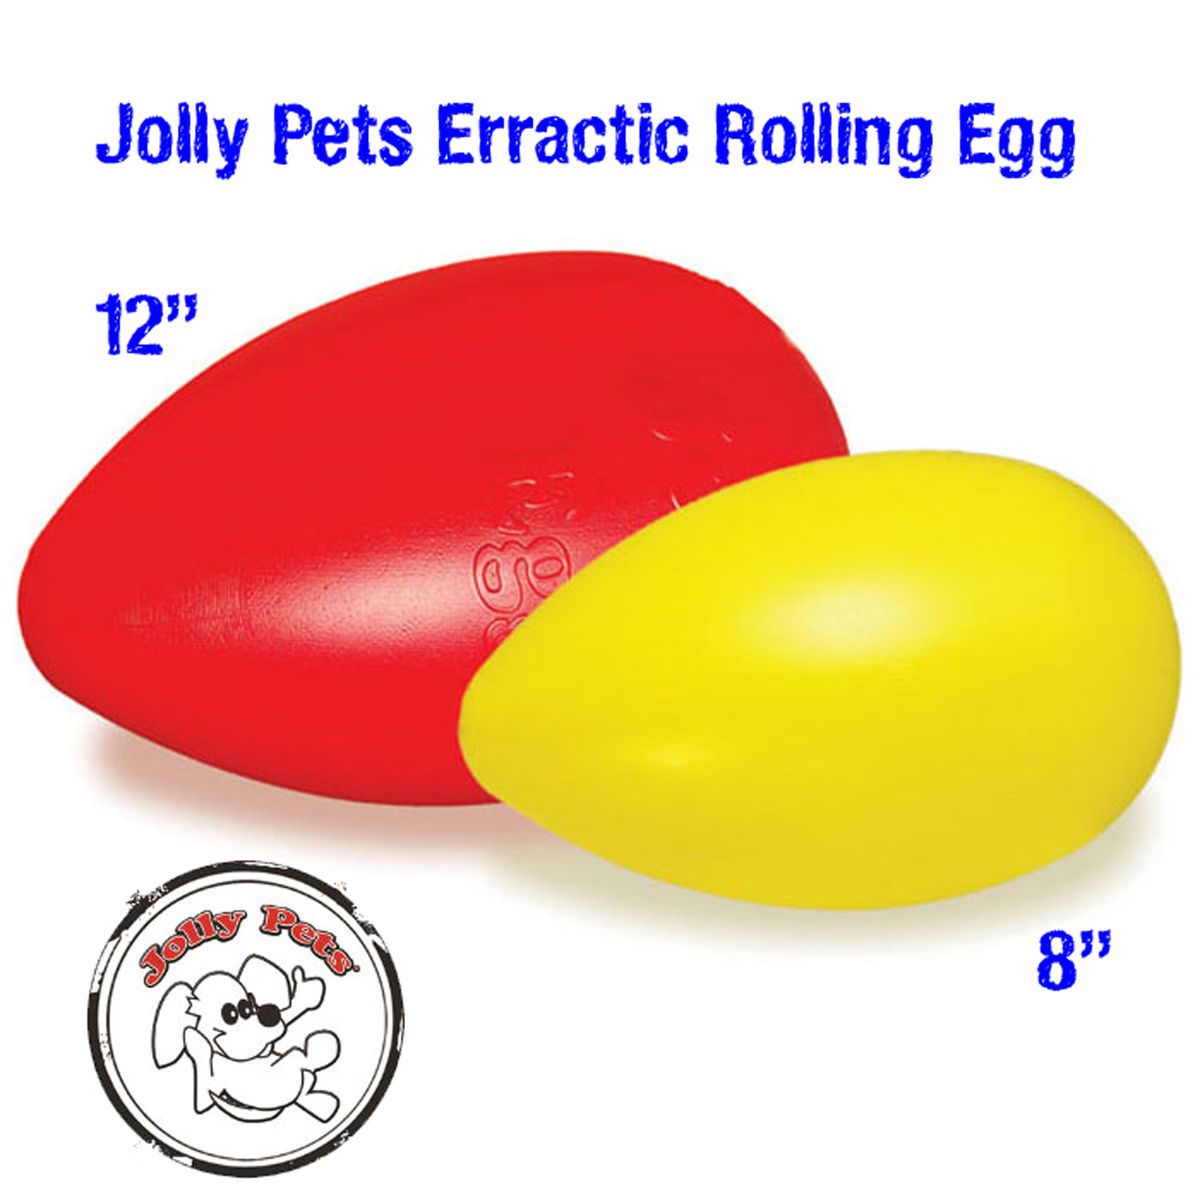 Jolly Pets Erractic Rolling Egg Dog Toy Small Jolly Egg 8 Plastic Egg 